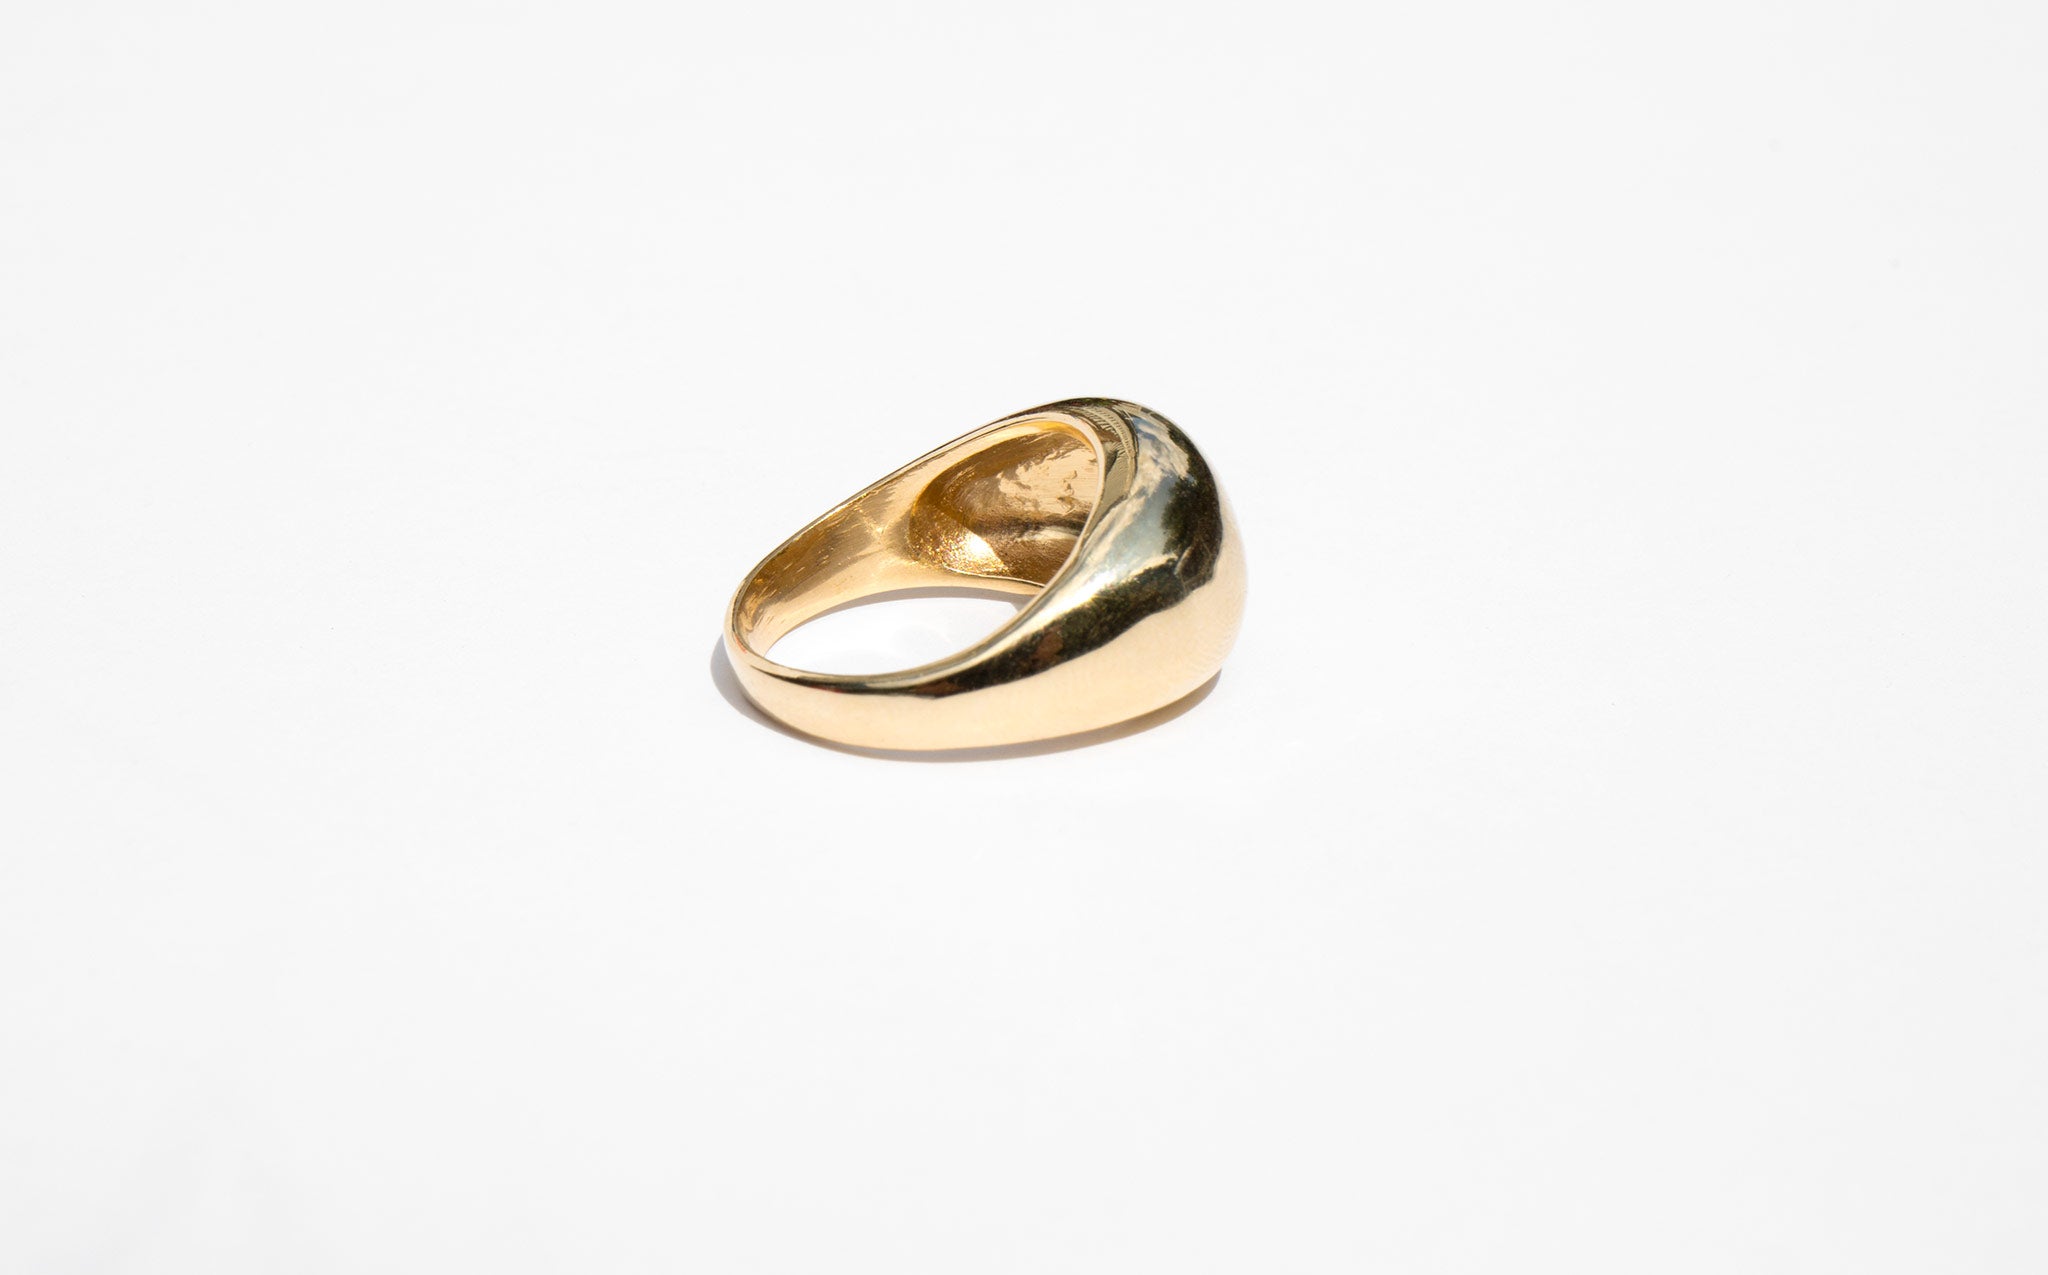 Vaulted Gold Ring